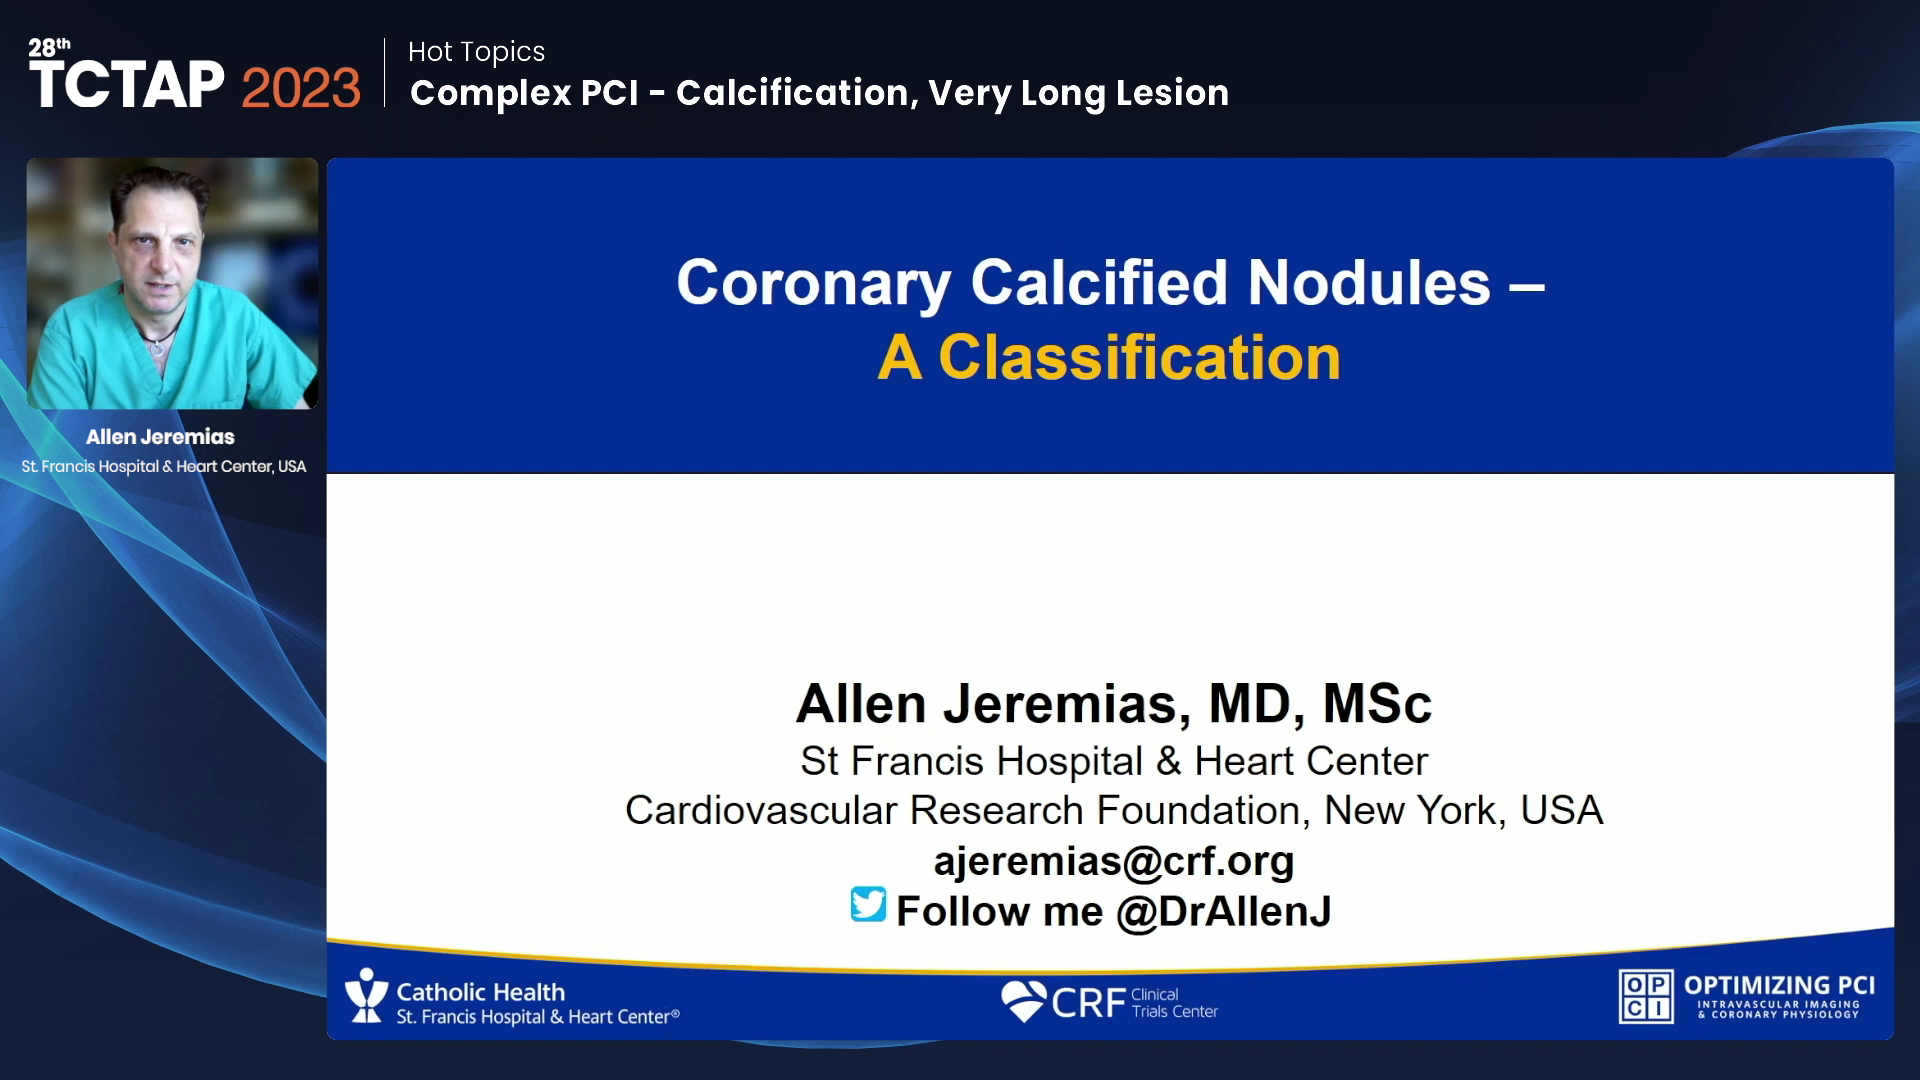 [Hot Topics] Complex PCI - Calcification, Very Long Lesion